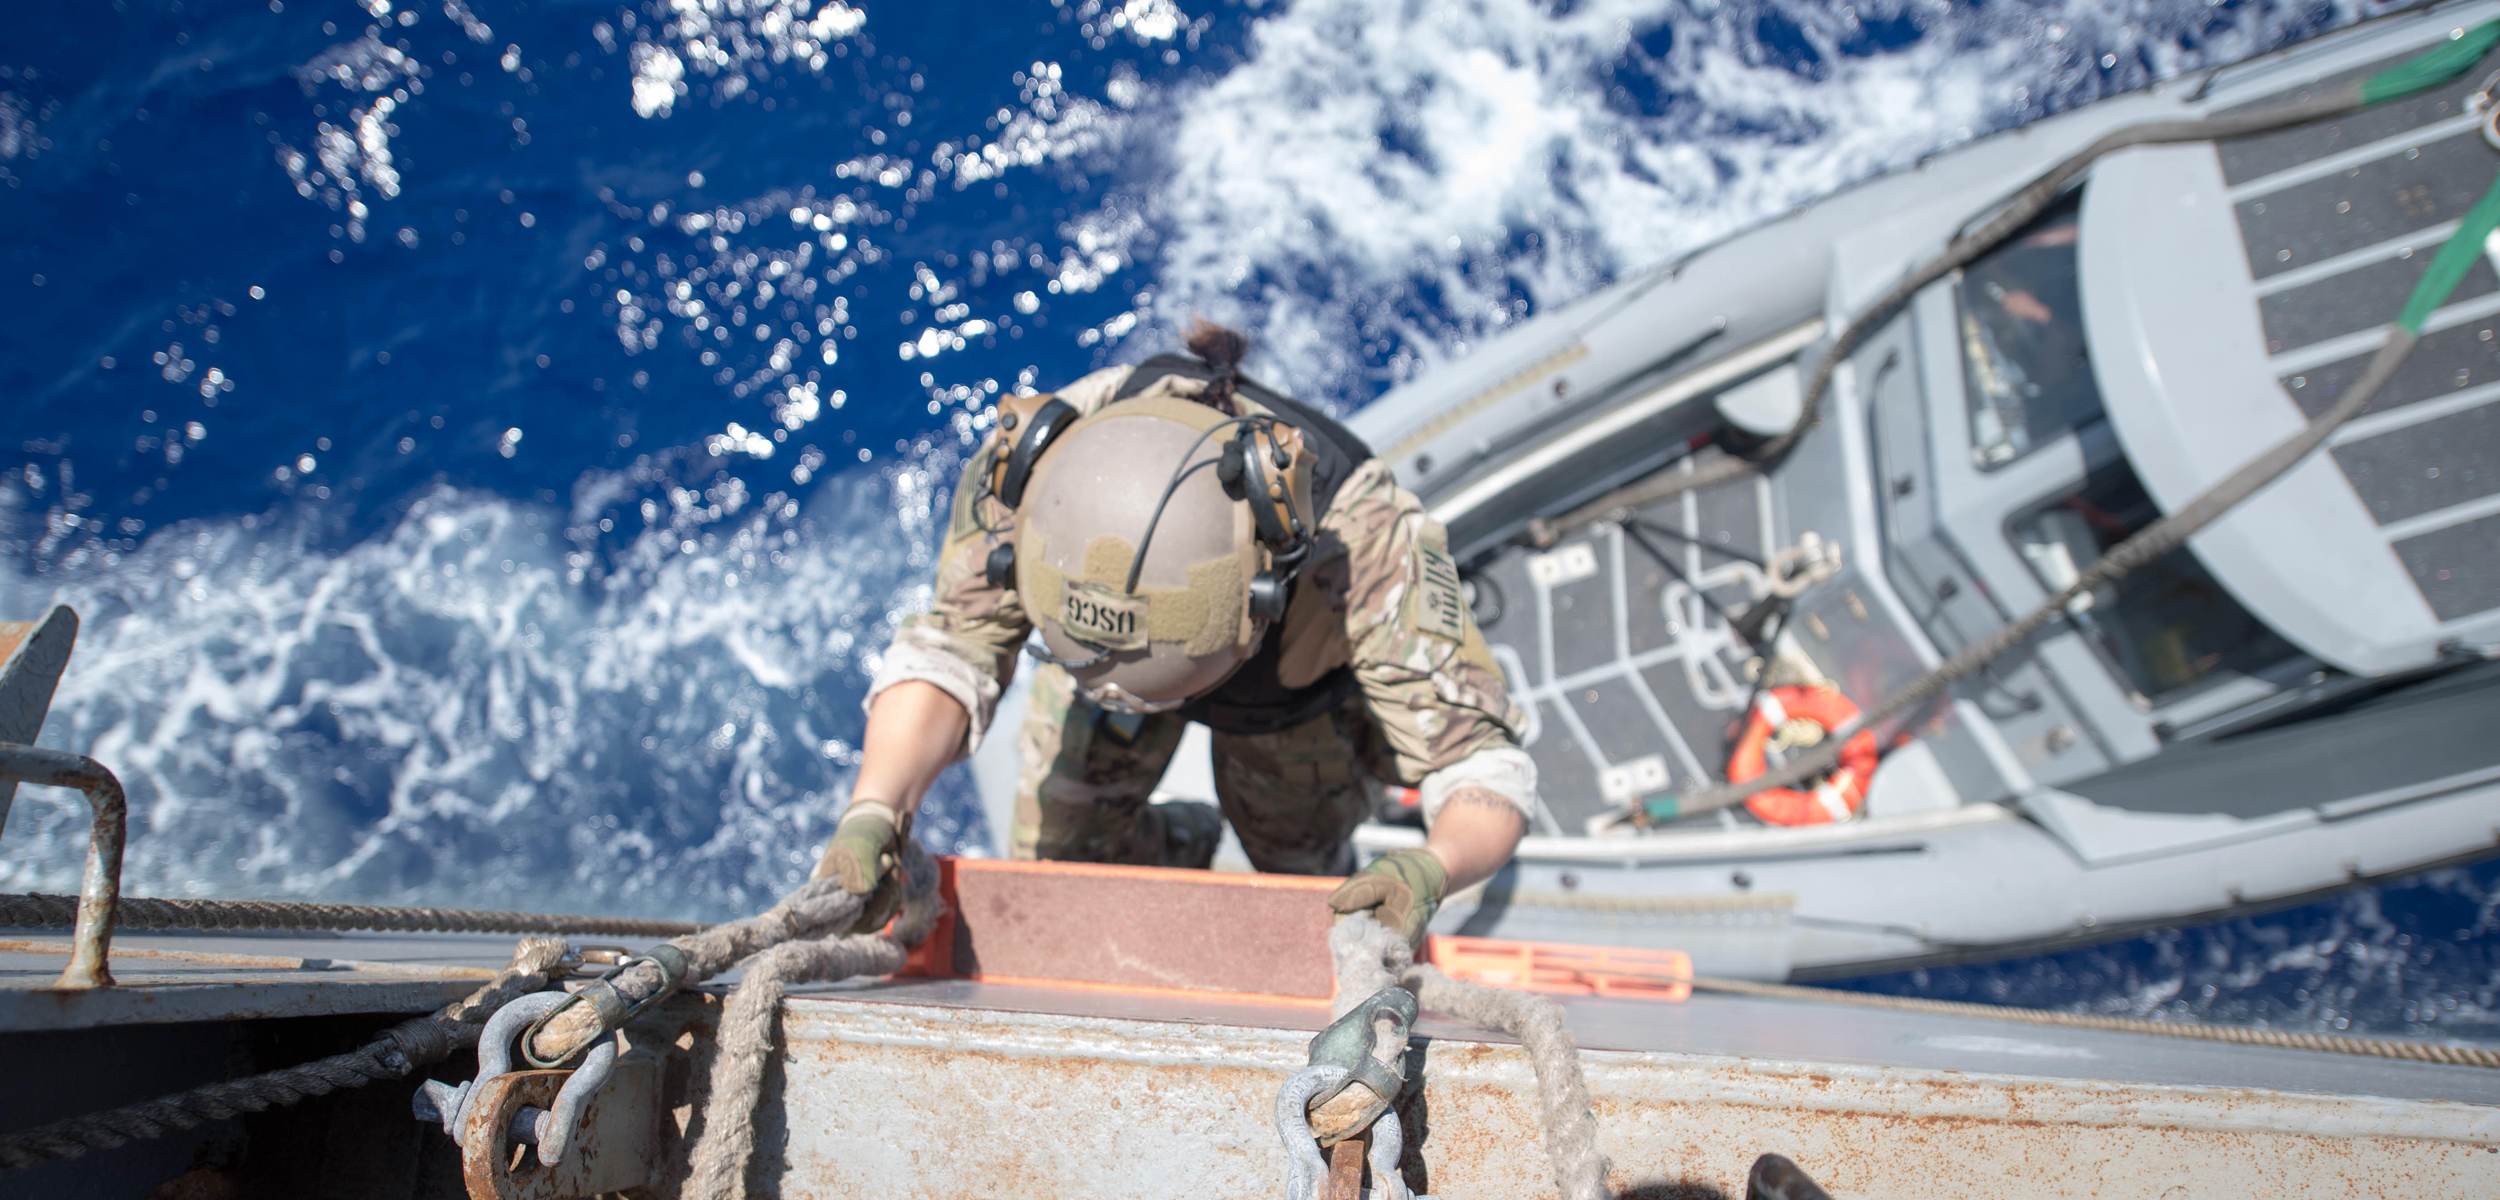 A birds eye view of a coast guard dressde in camoflauge climbing a ladder to board a ship with the blue ocean below.